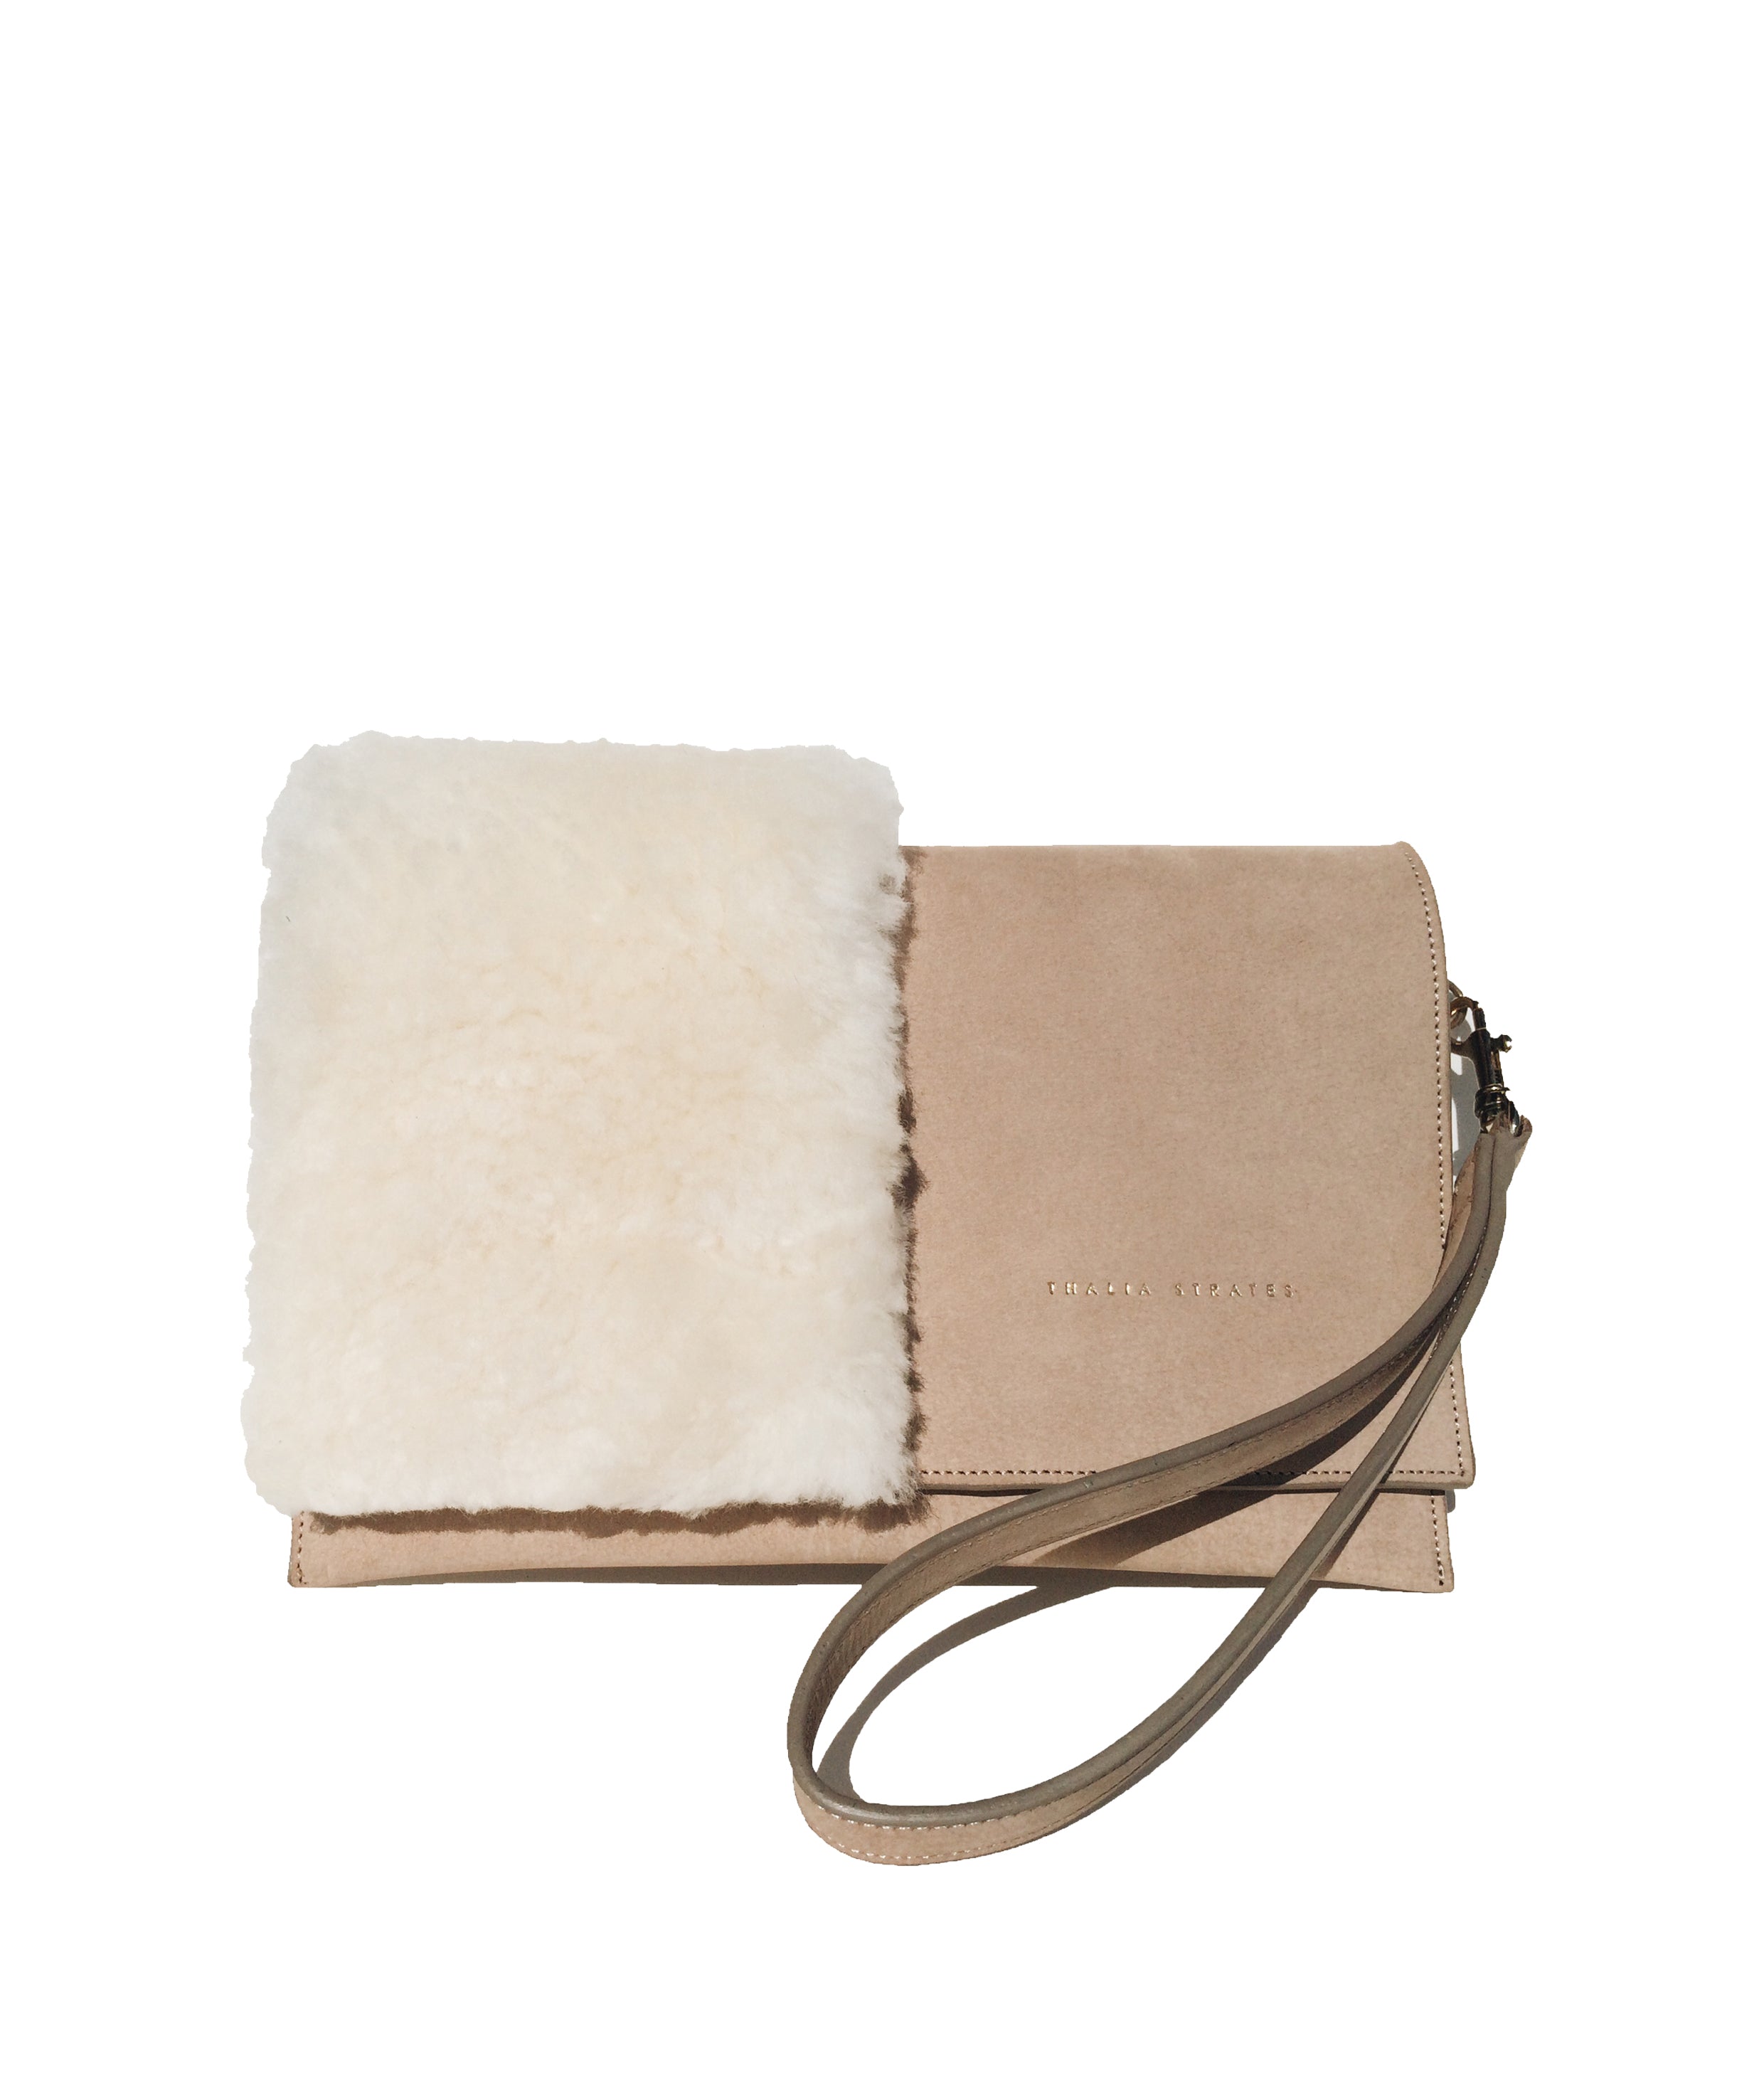 Mali leather bag with shearling details - sand